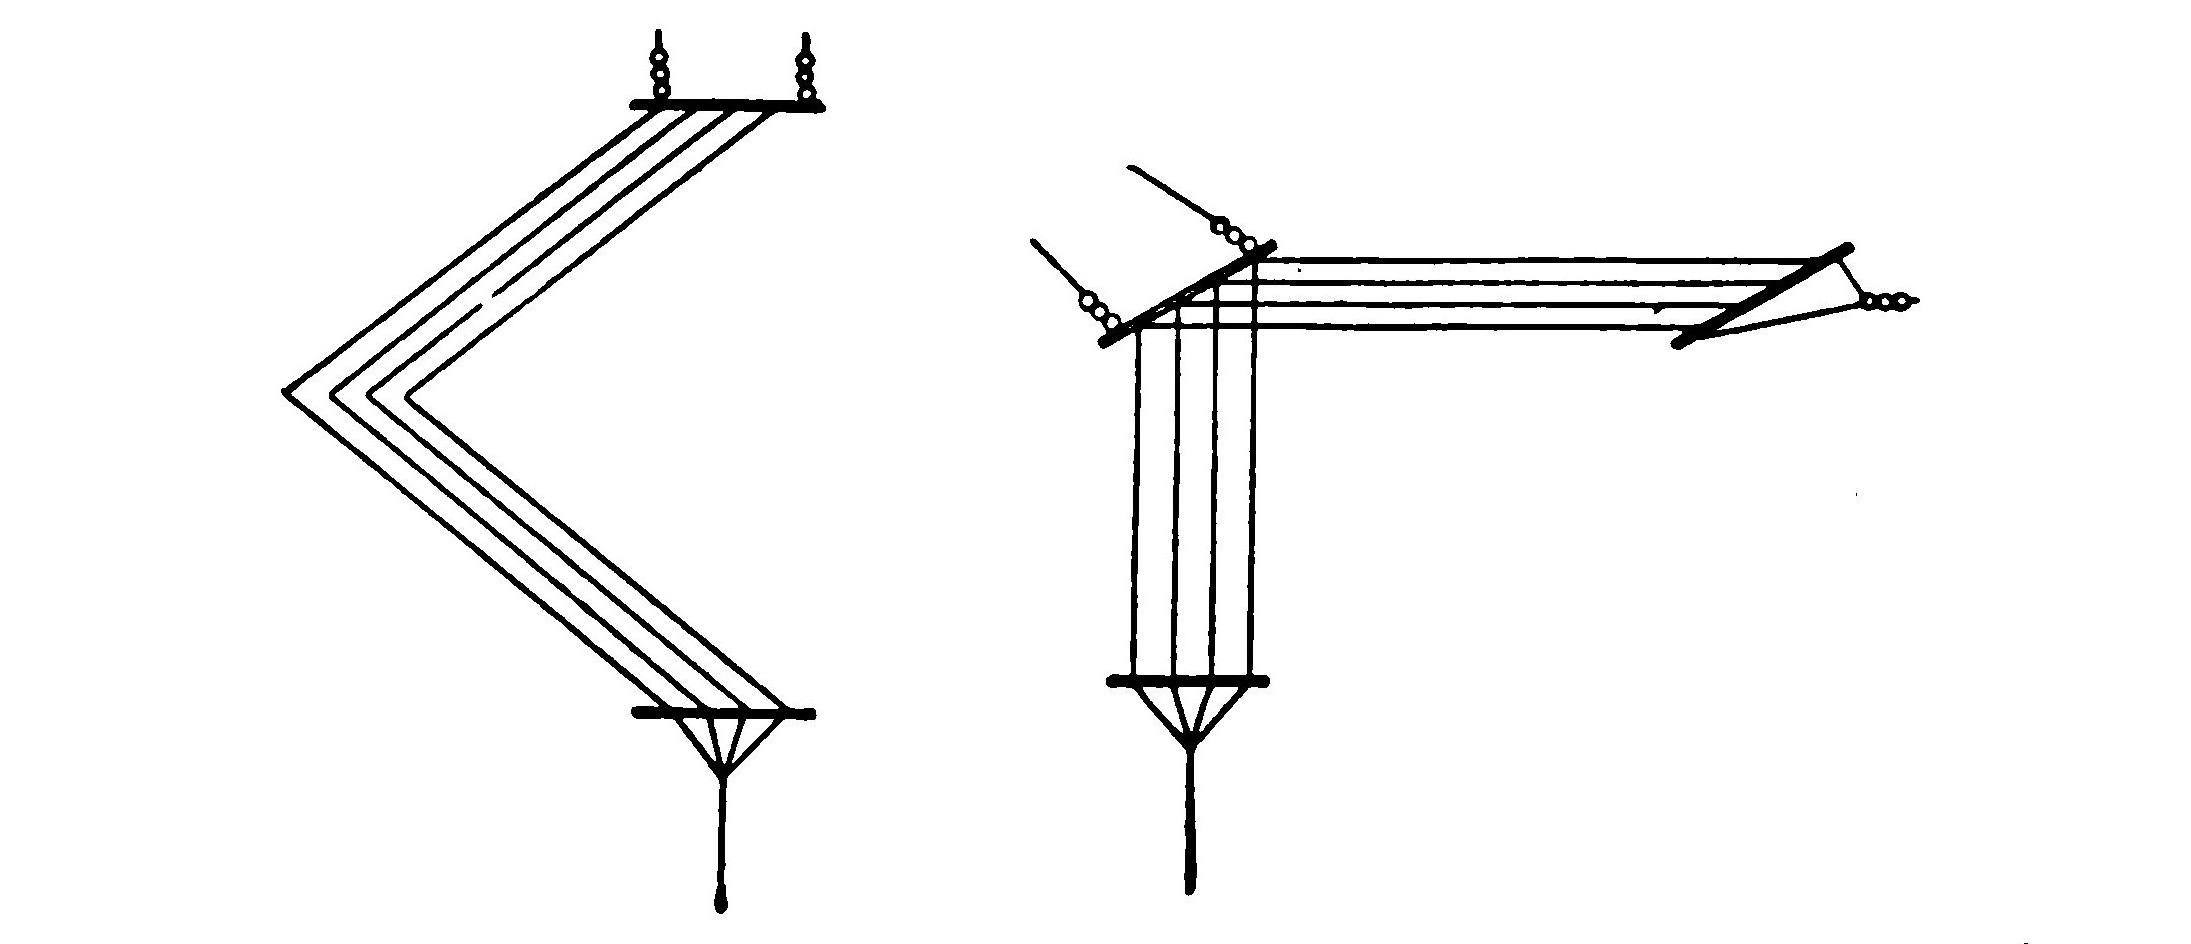 FIG. 18.—Aerials of the "V" and inverted "L" types.